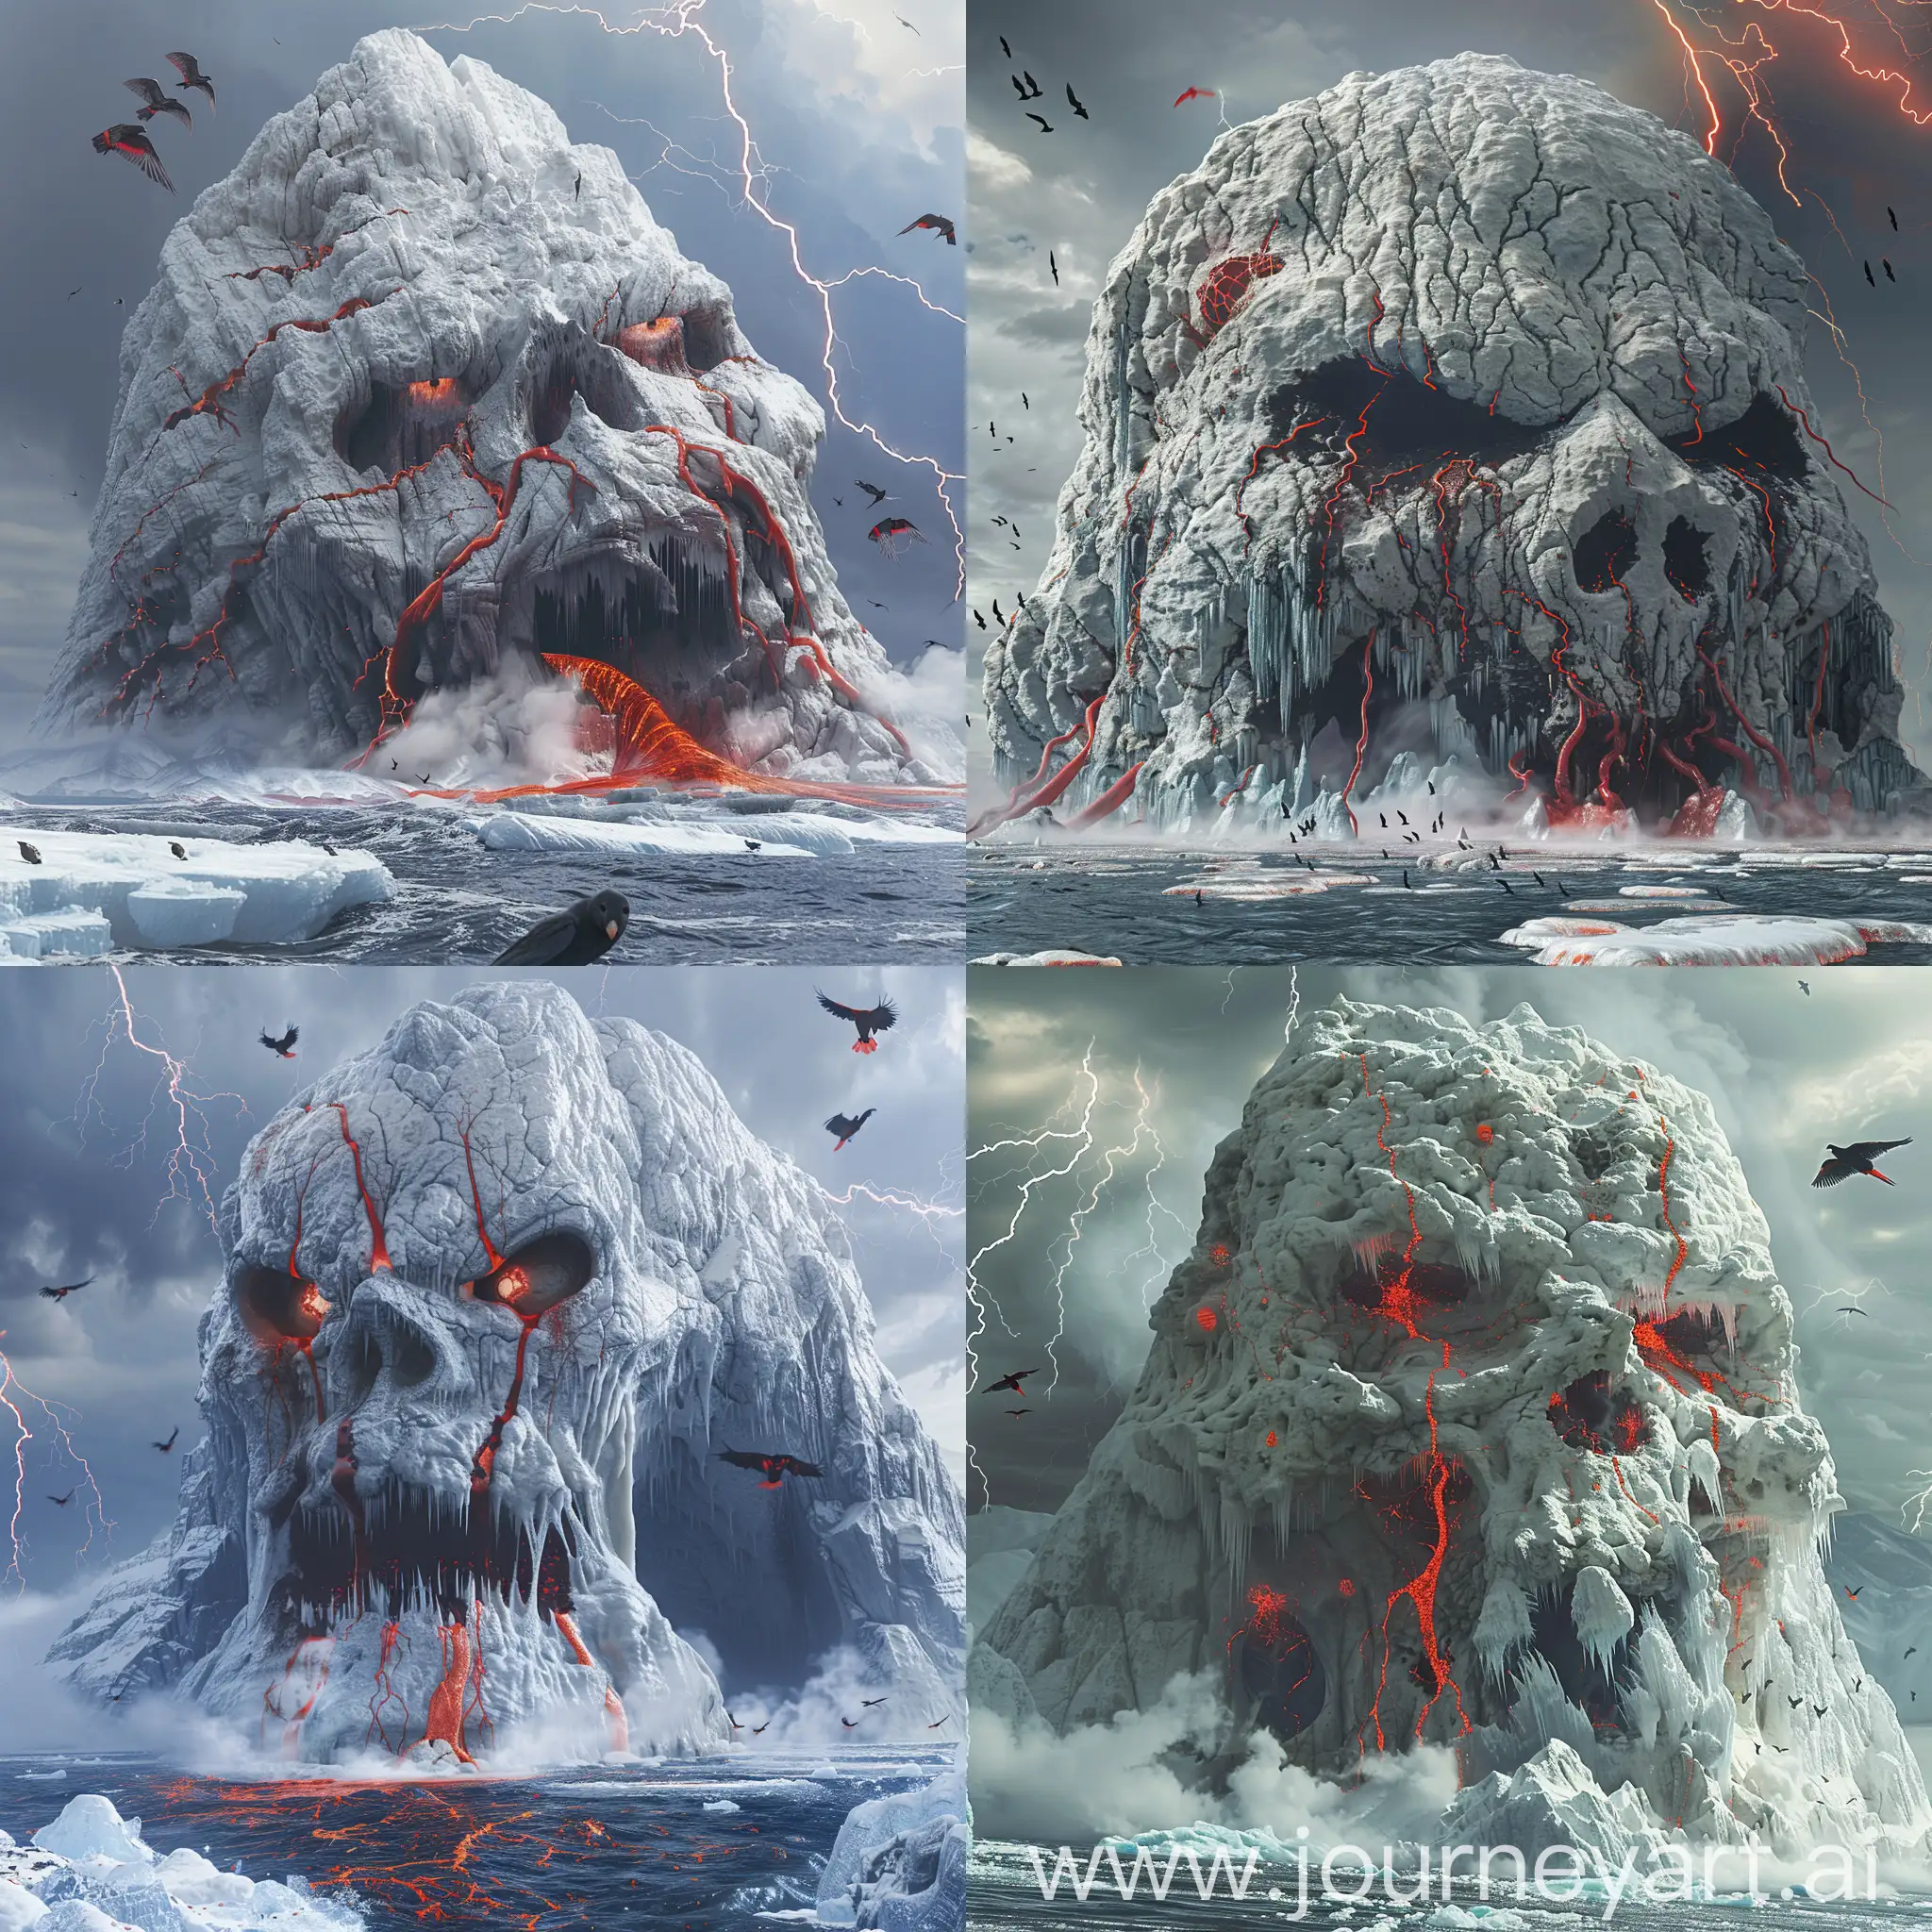 Fearsome-DemonHead-Mountain-with-Lava-and-Steaming-Ocean